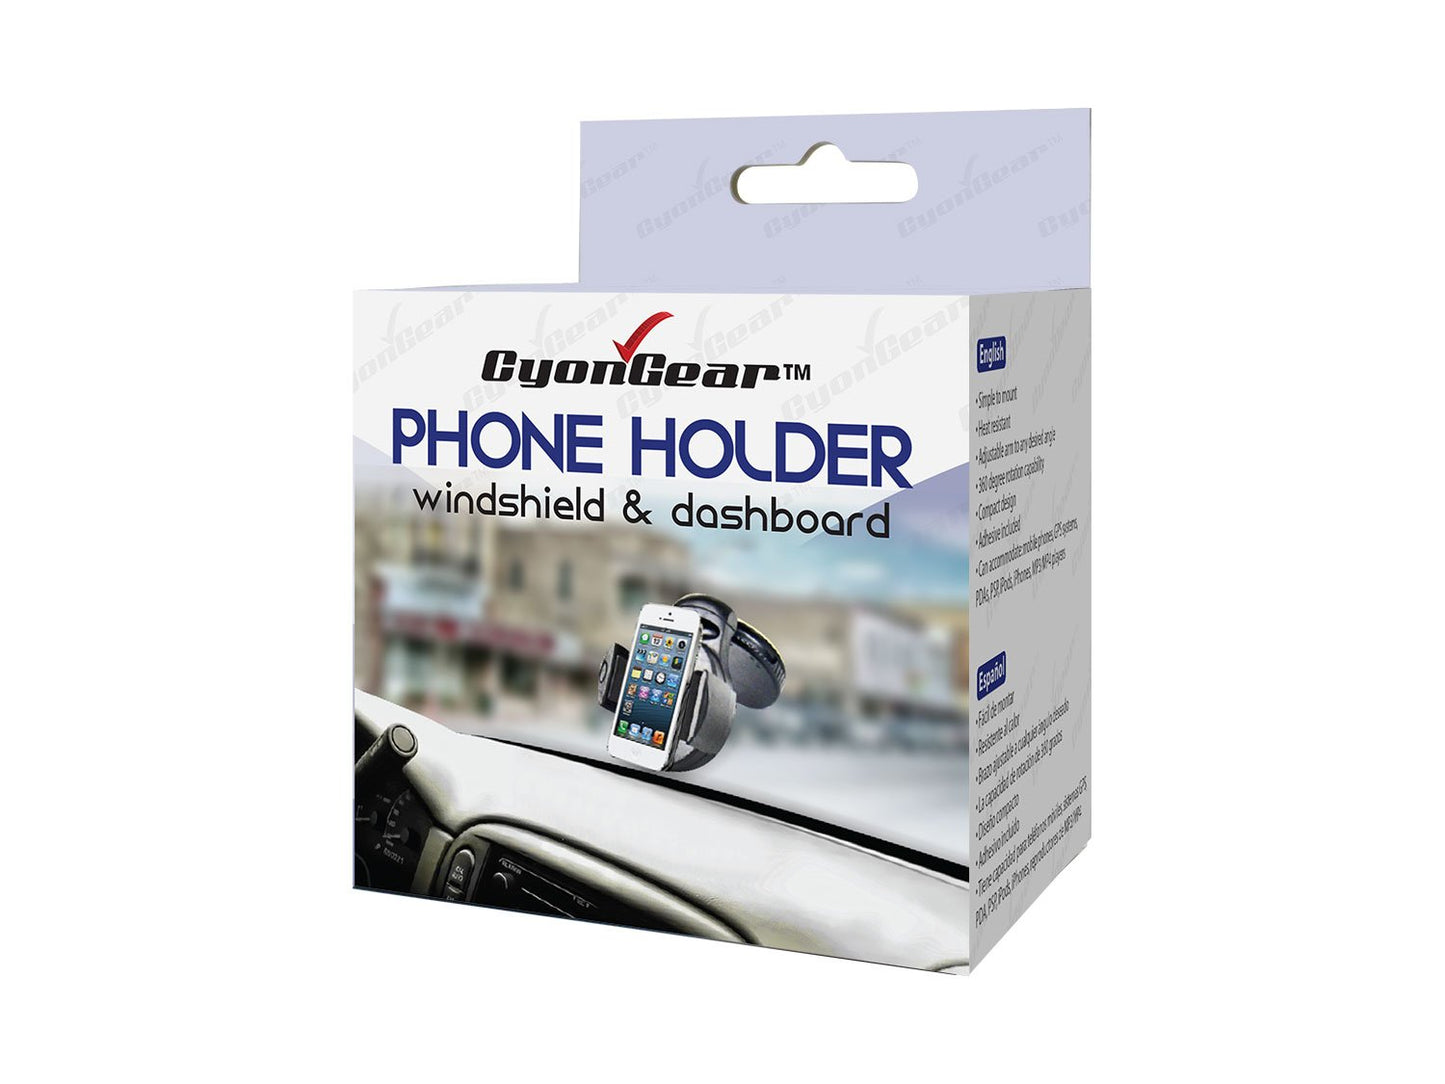 PHHD110 - CyonGear Windshield Dashboard Phone Holder for Phones up to 3 Inches Wides